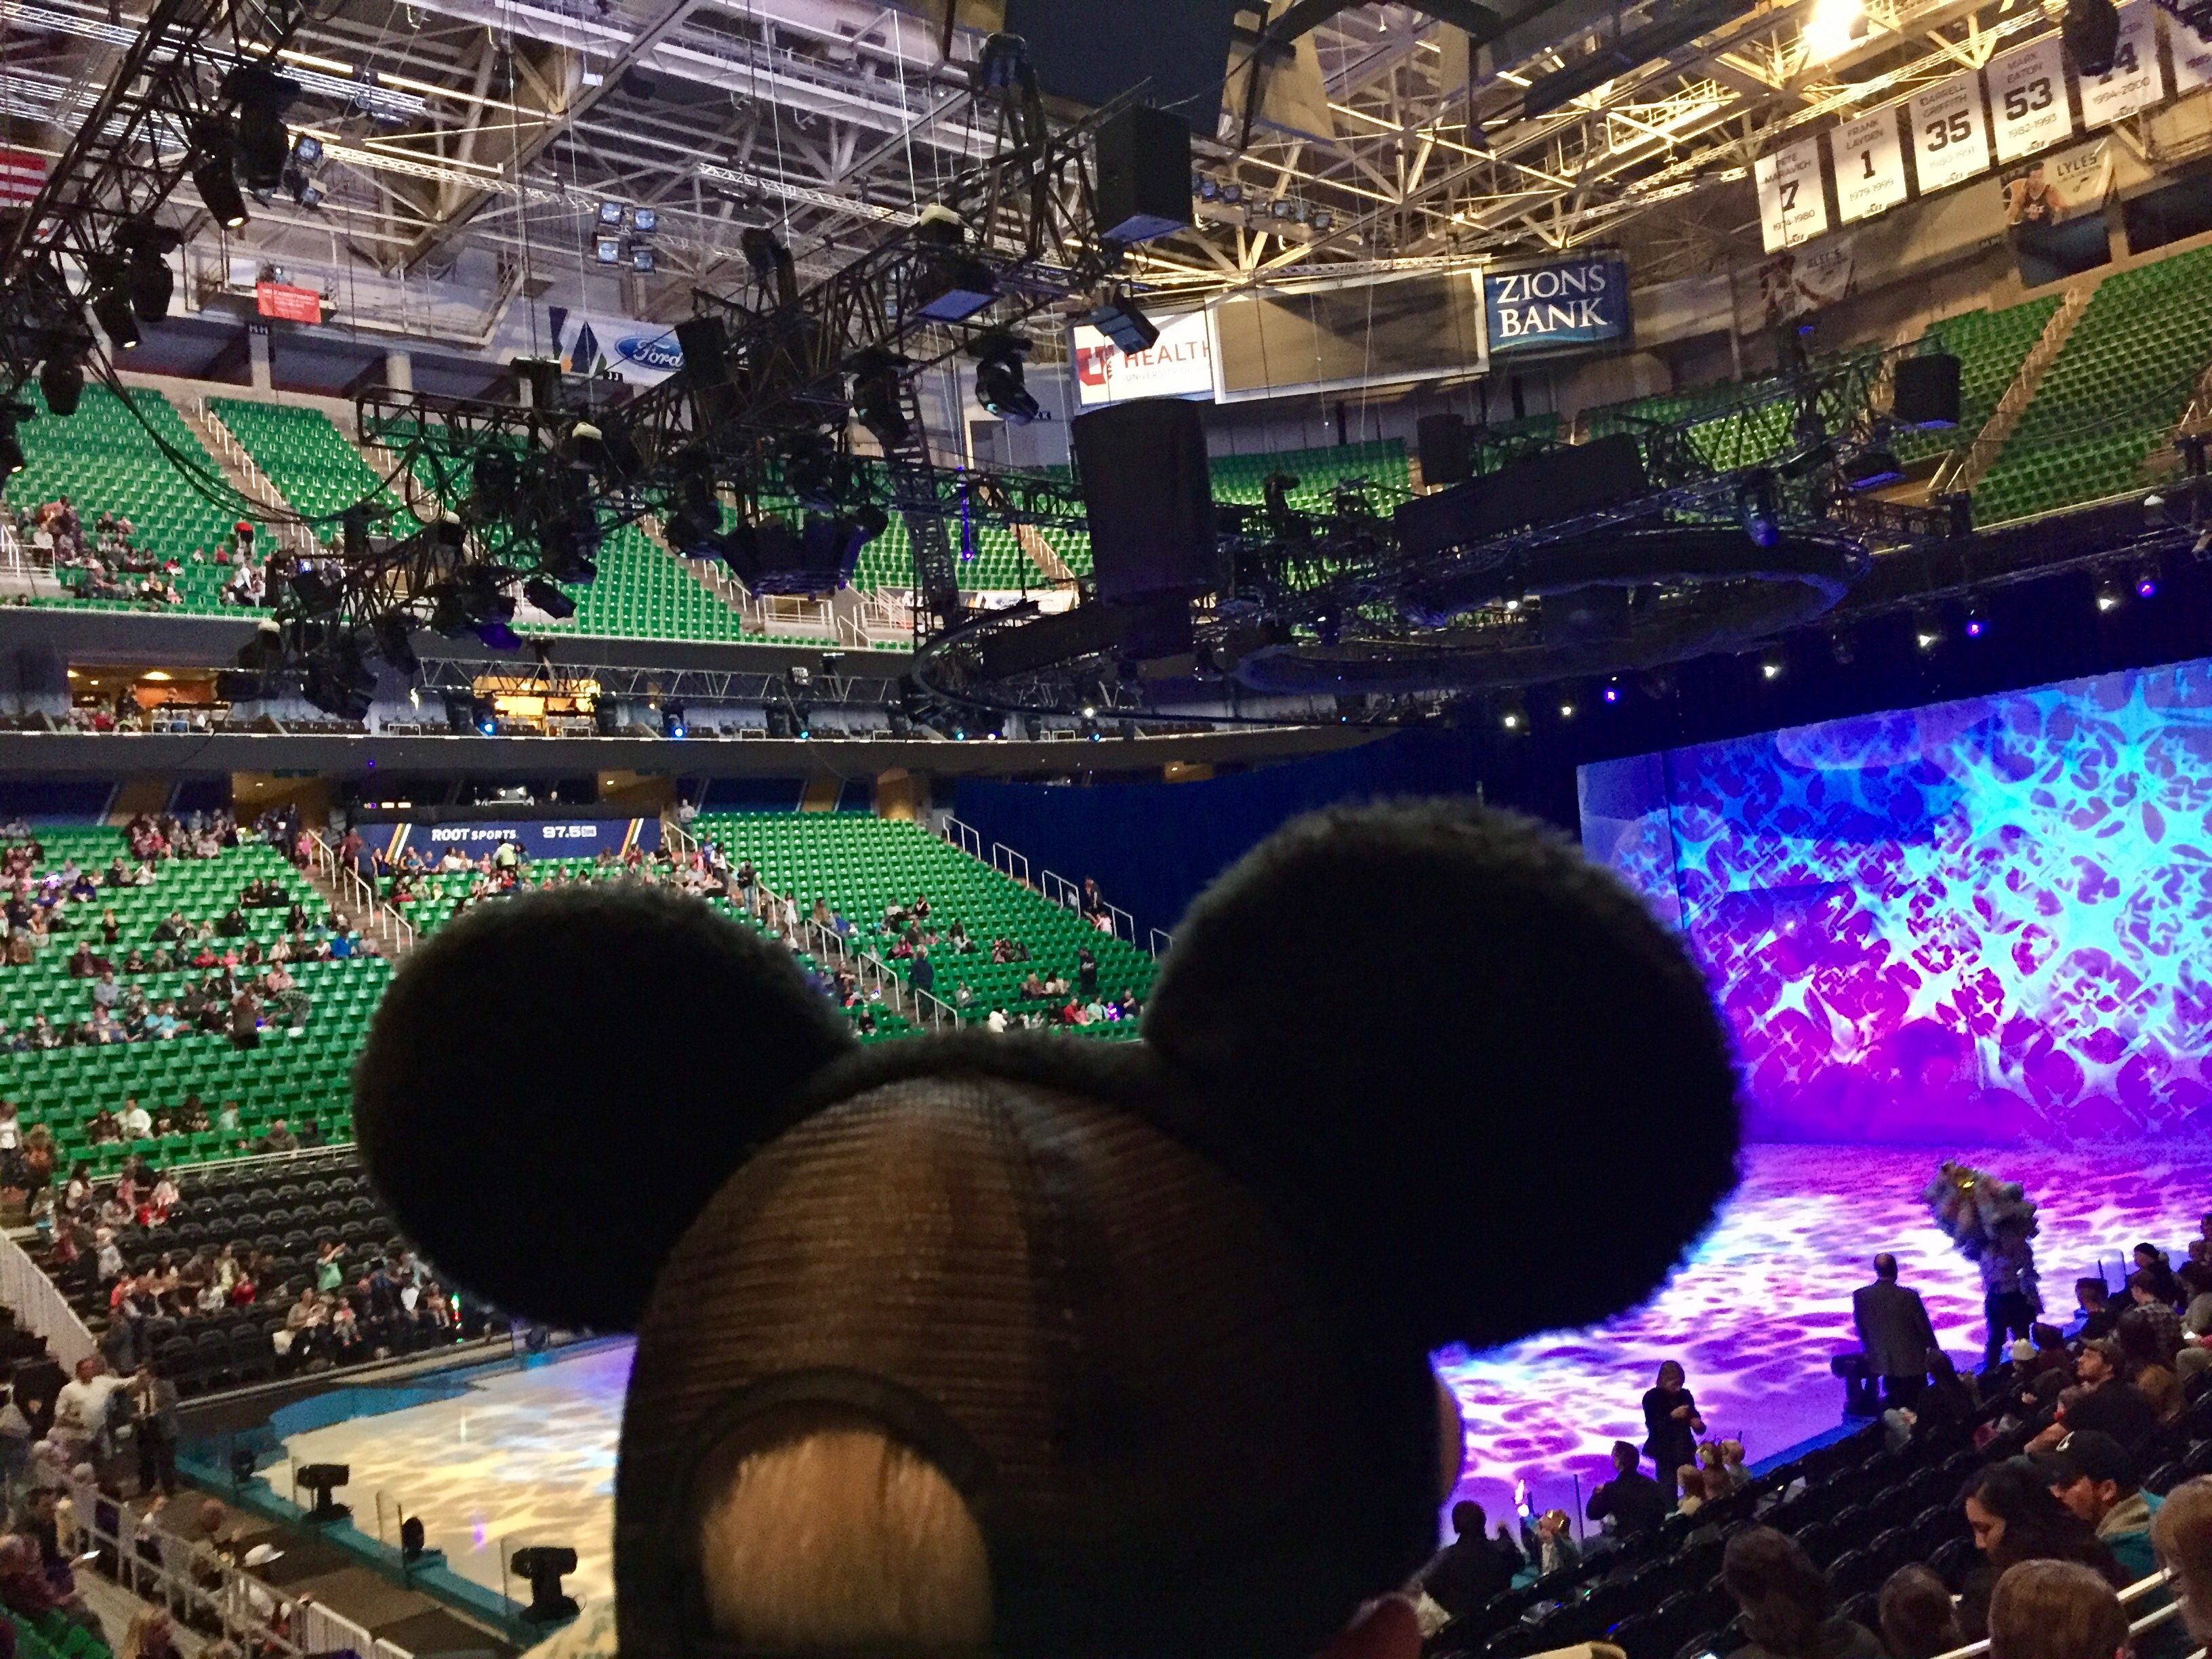 DISNEY ON ICE presents WORLDS OF ENCHANTMENT Review and